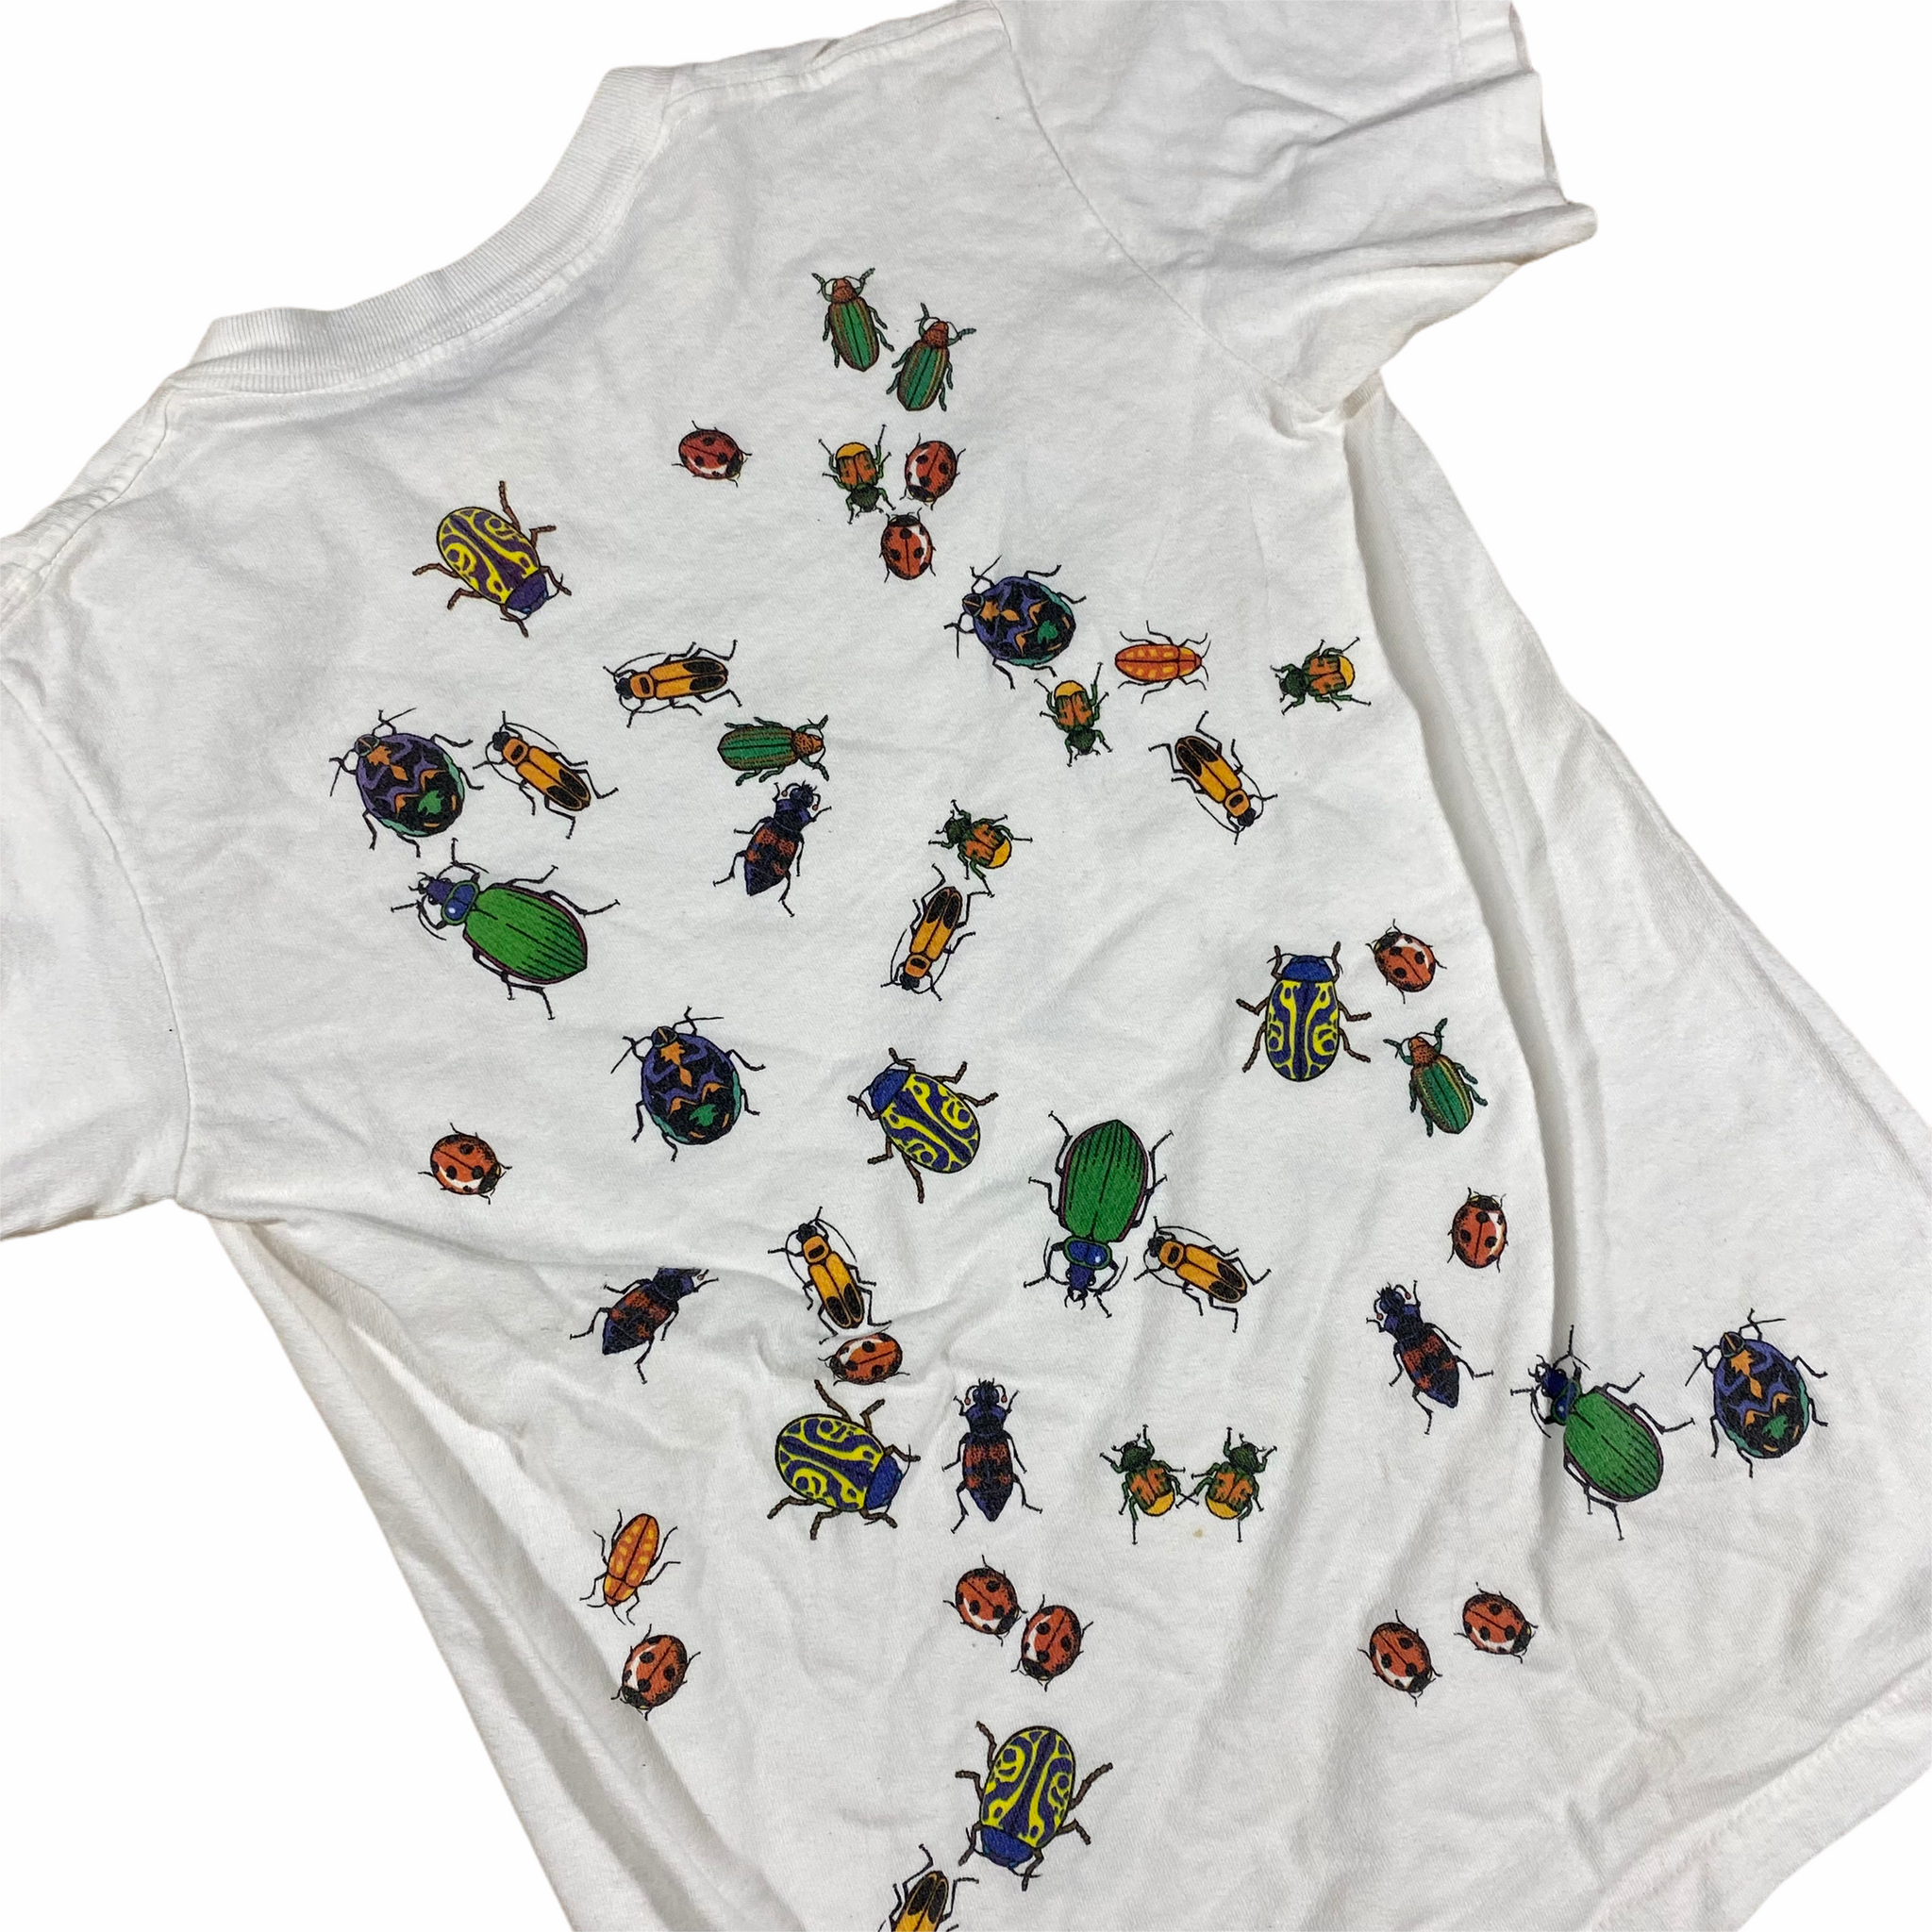 The nature company beetles tee. XS fit